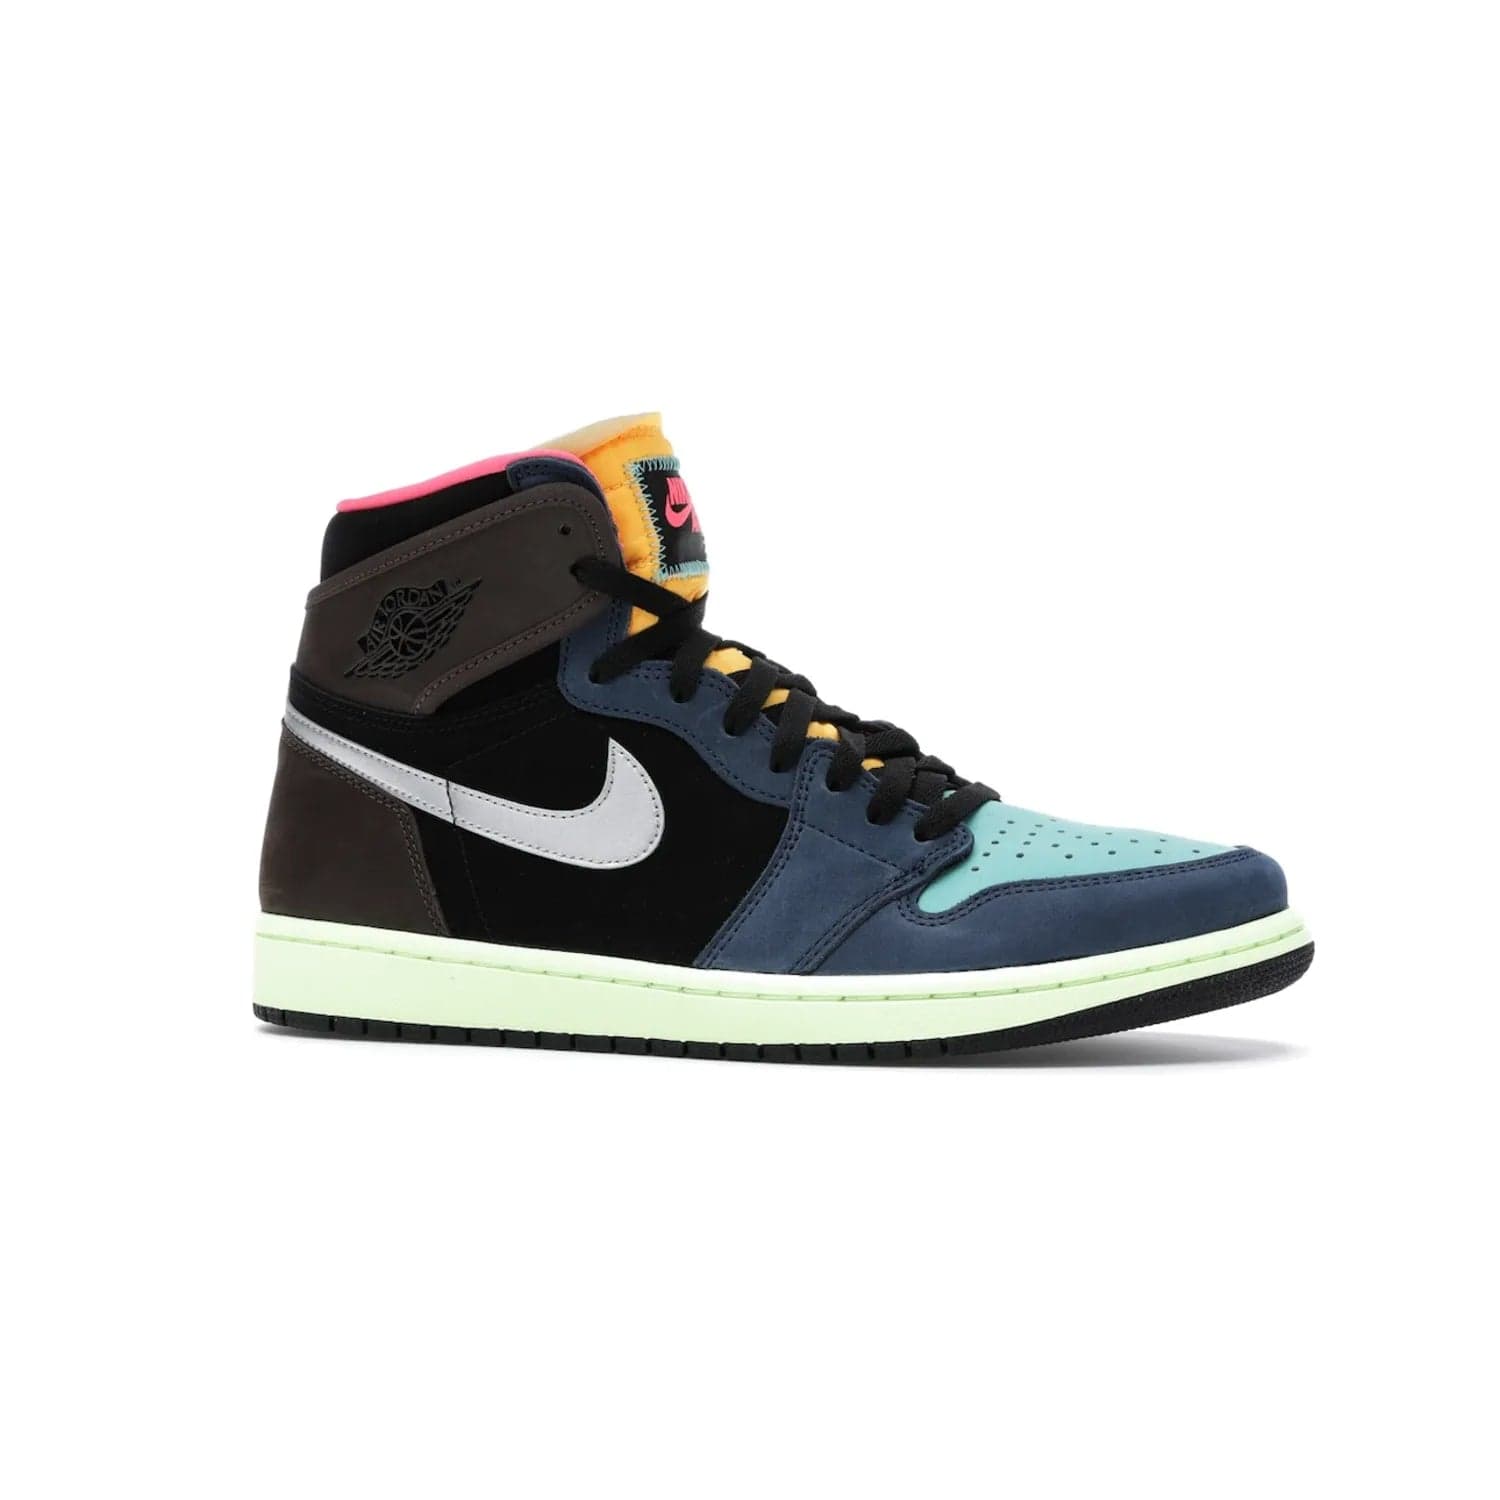 Jordan 1 Retro High Tokyo Bio Hack - Image 3 - Only at www.BallersClubKickz.com - Step up your sneaker game with the Air Jordan 1 Retro High Tokyo Bio Hack! Unique design featuring multiple materials and eye-catching colors. Metallic leather Swoosh and light green midsole for a stunning look. Available now for just $170.